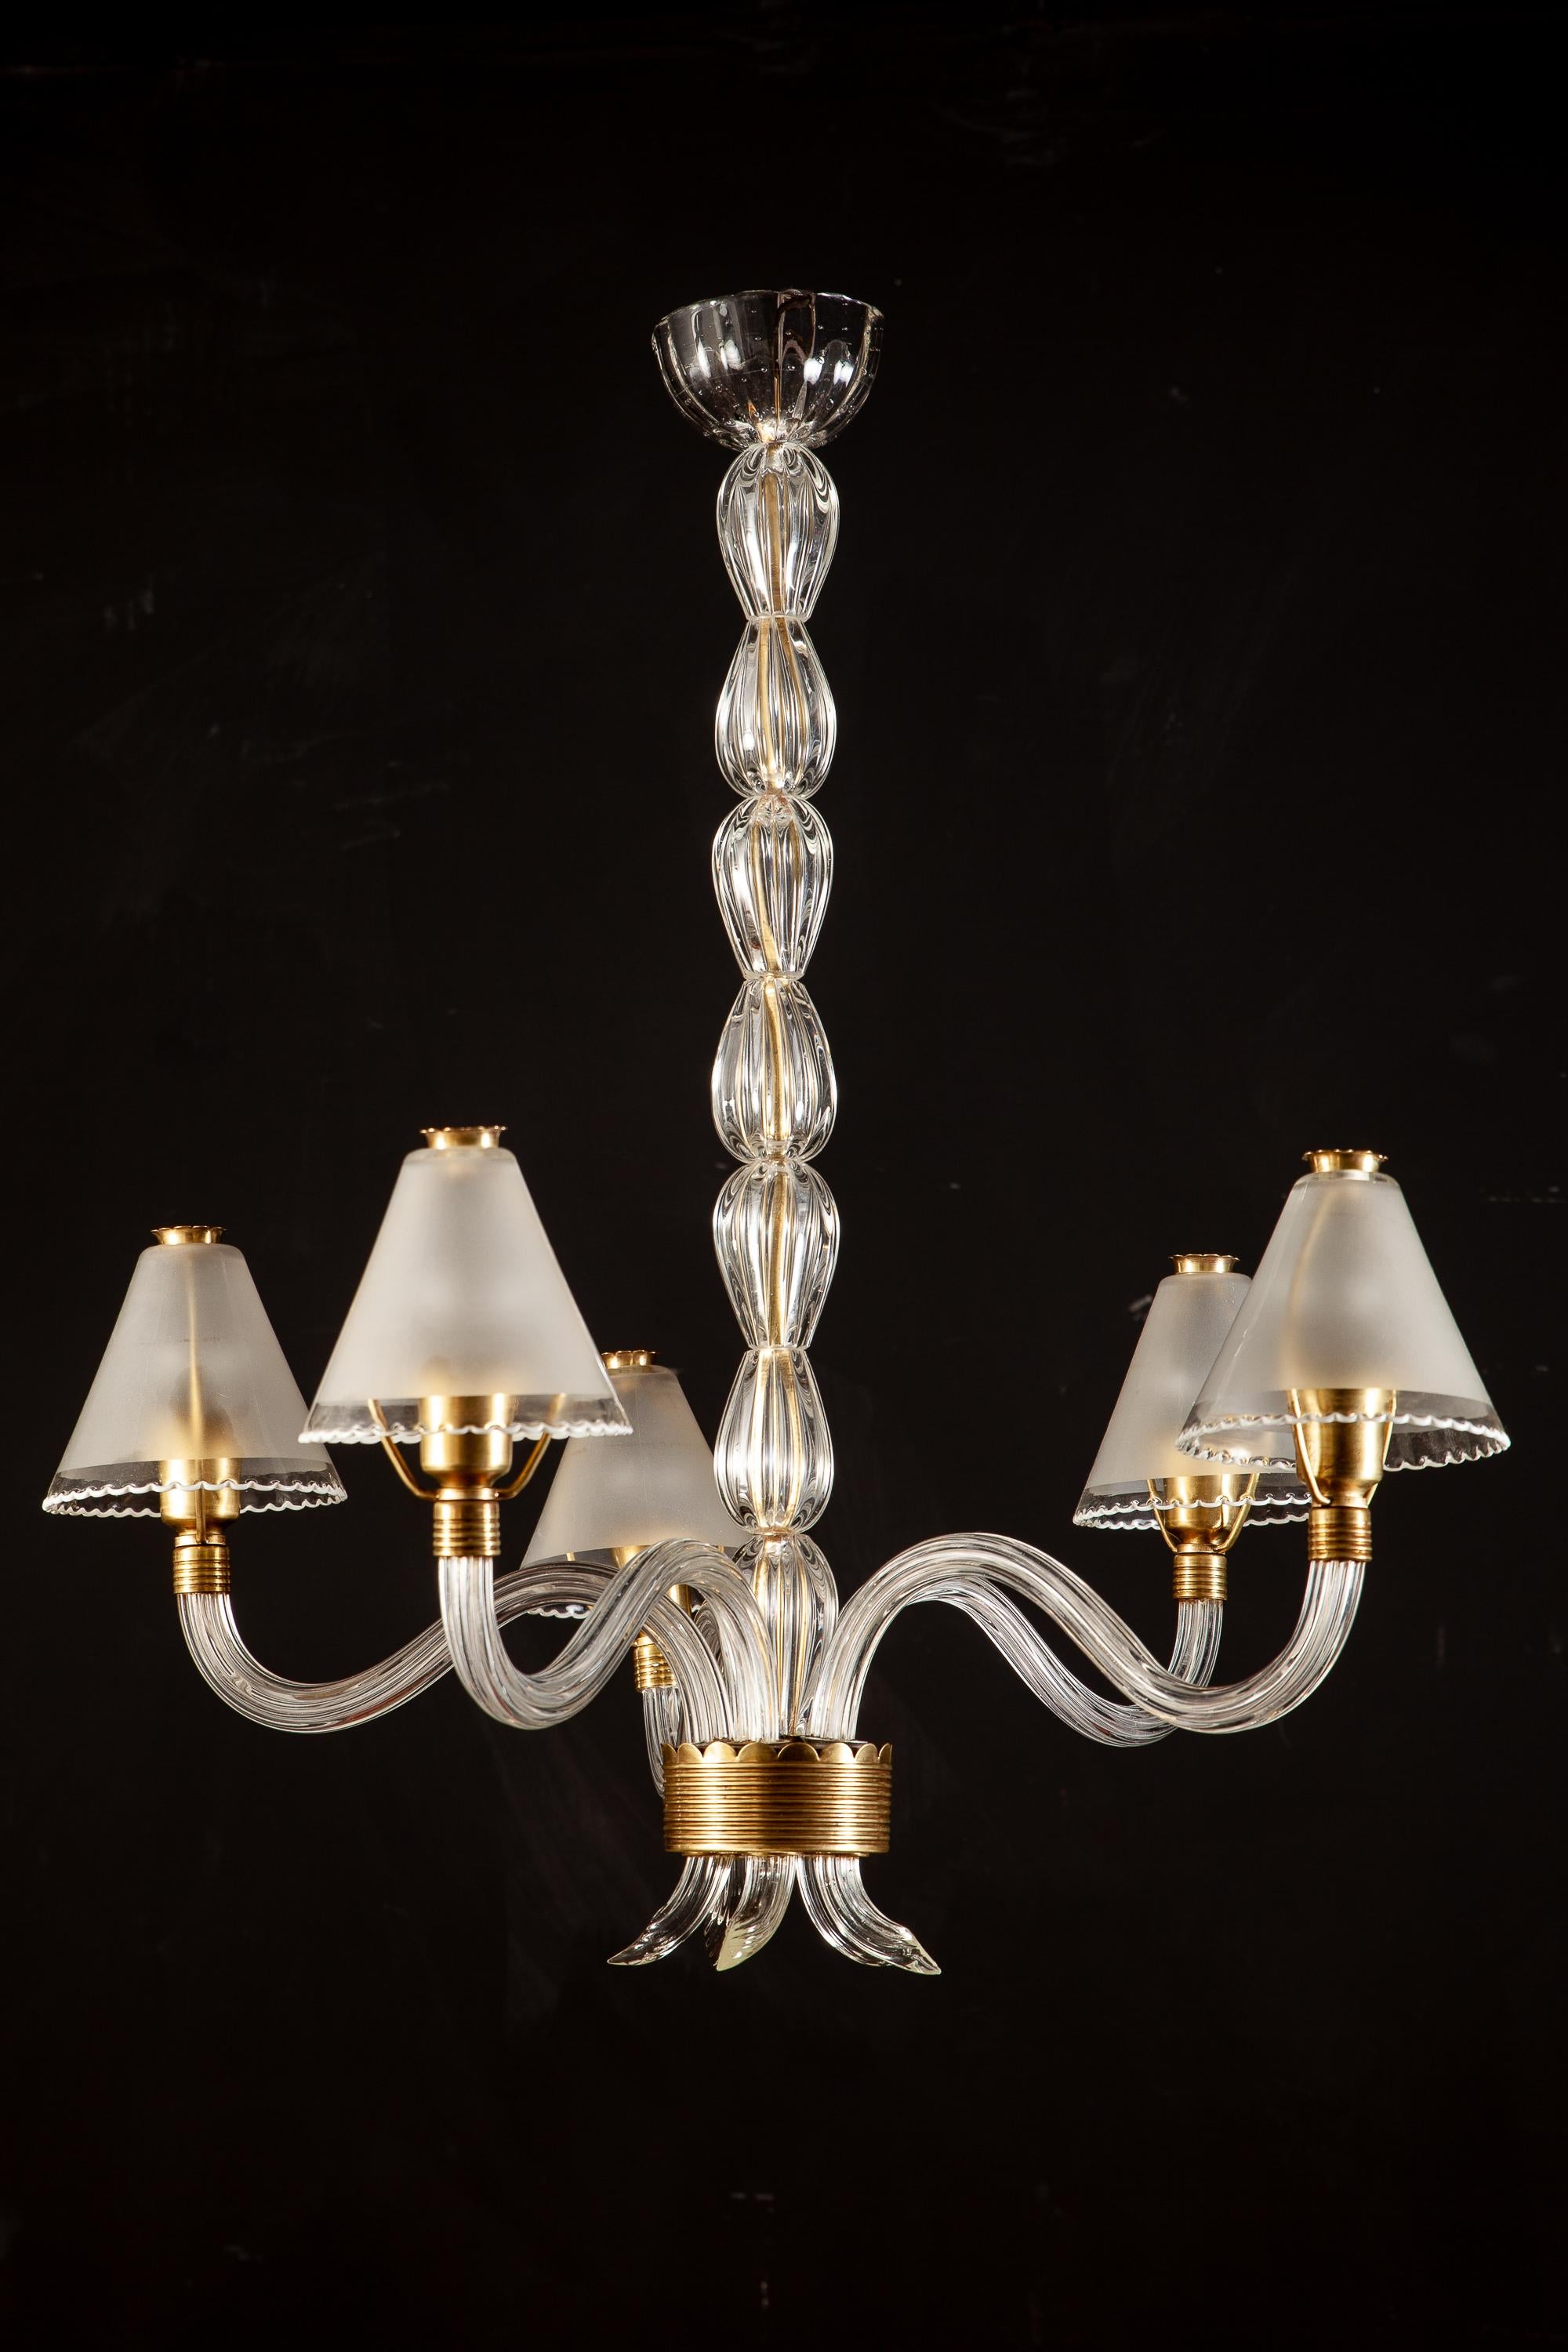 Five arms Murano glass chandelier with original delicious opaline glass shadows supported by a brass frame.
Elegant Design by Ercole Barovier.
Excellent vintage condition.
Five E 14 light bulbs.